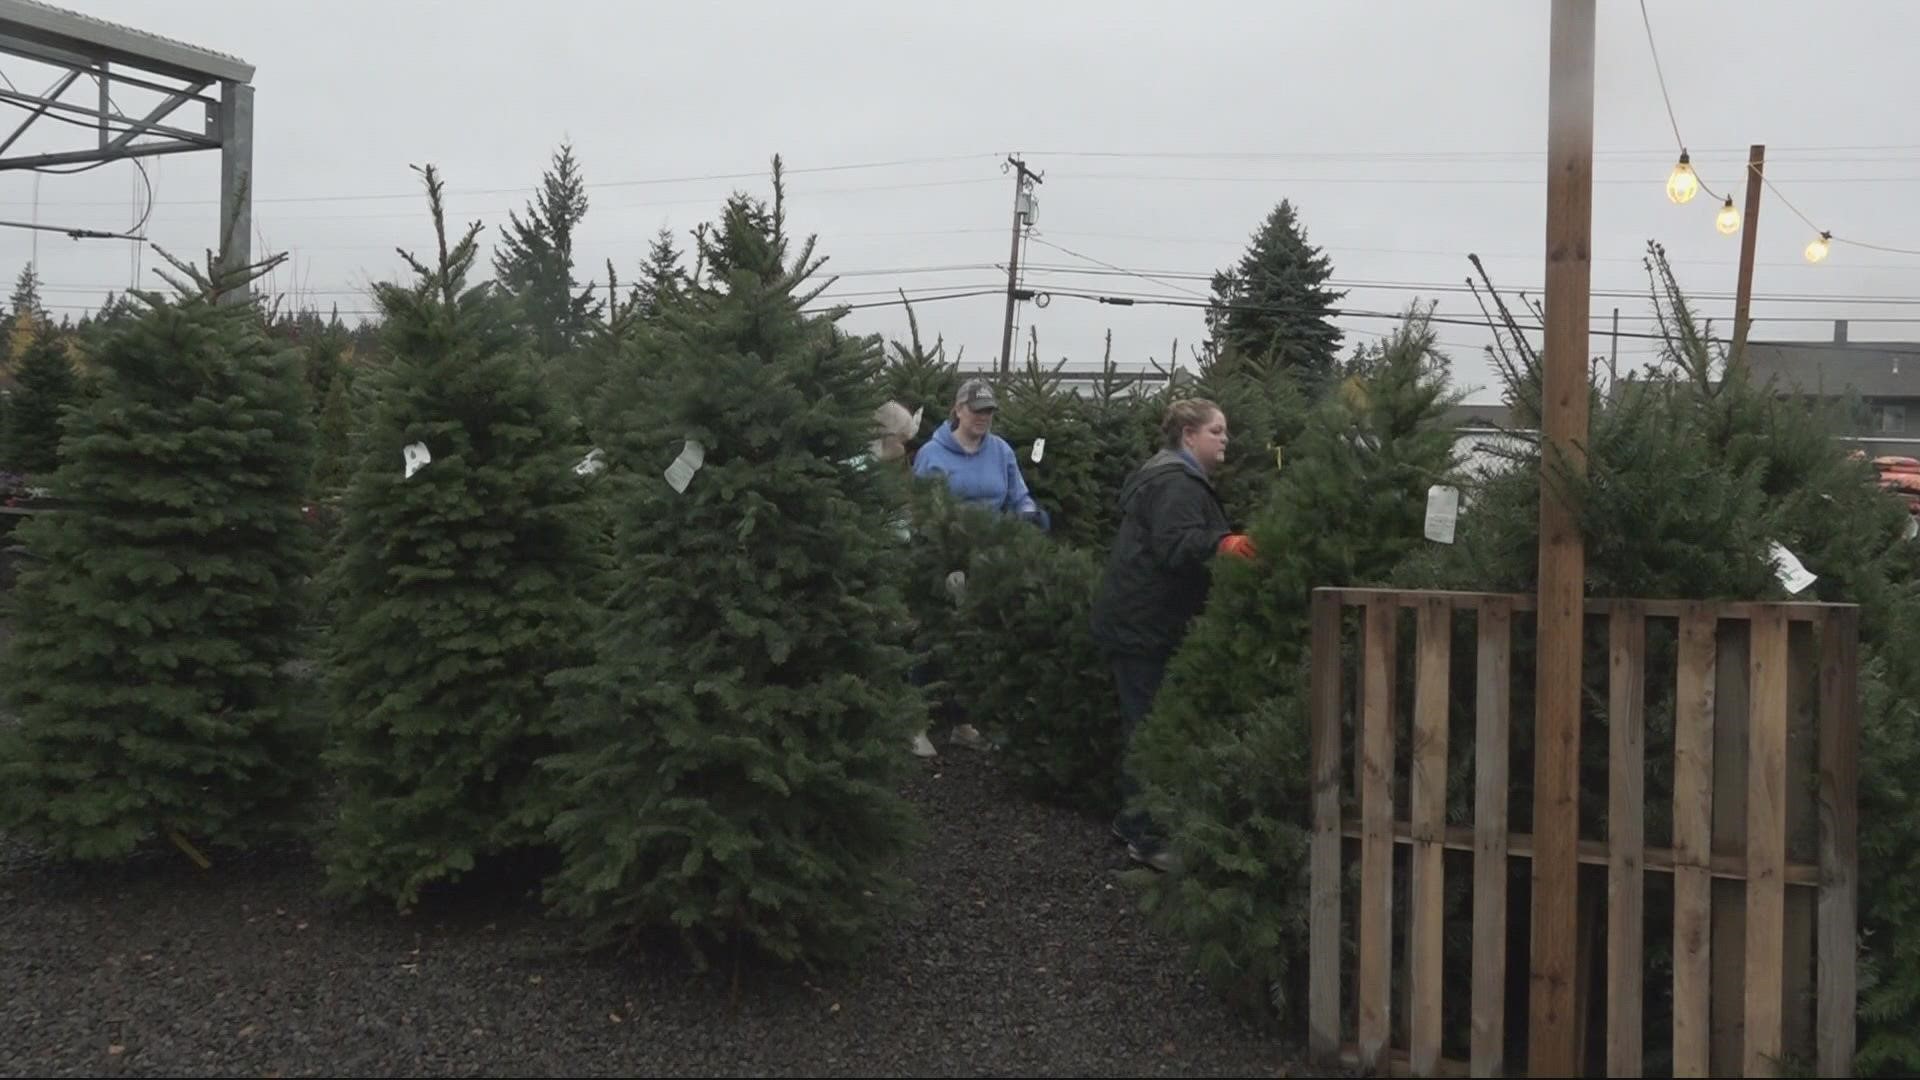 Supply chain issues will likely impact the price of both living and artificial Christmas trees. KGW's Christelle Koumoue reports.